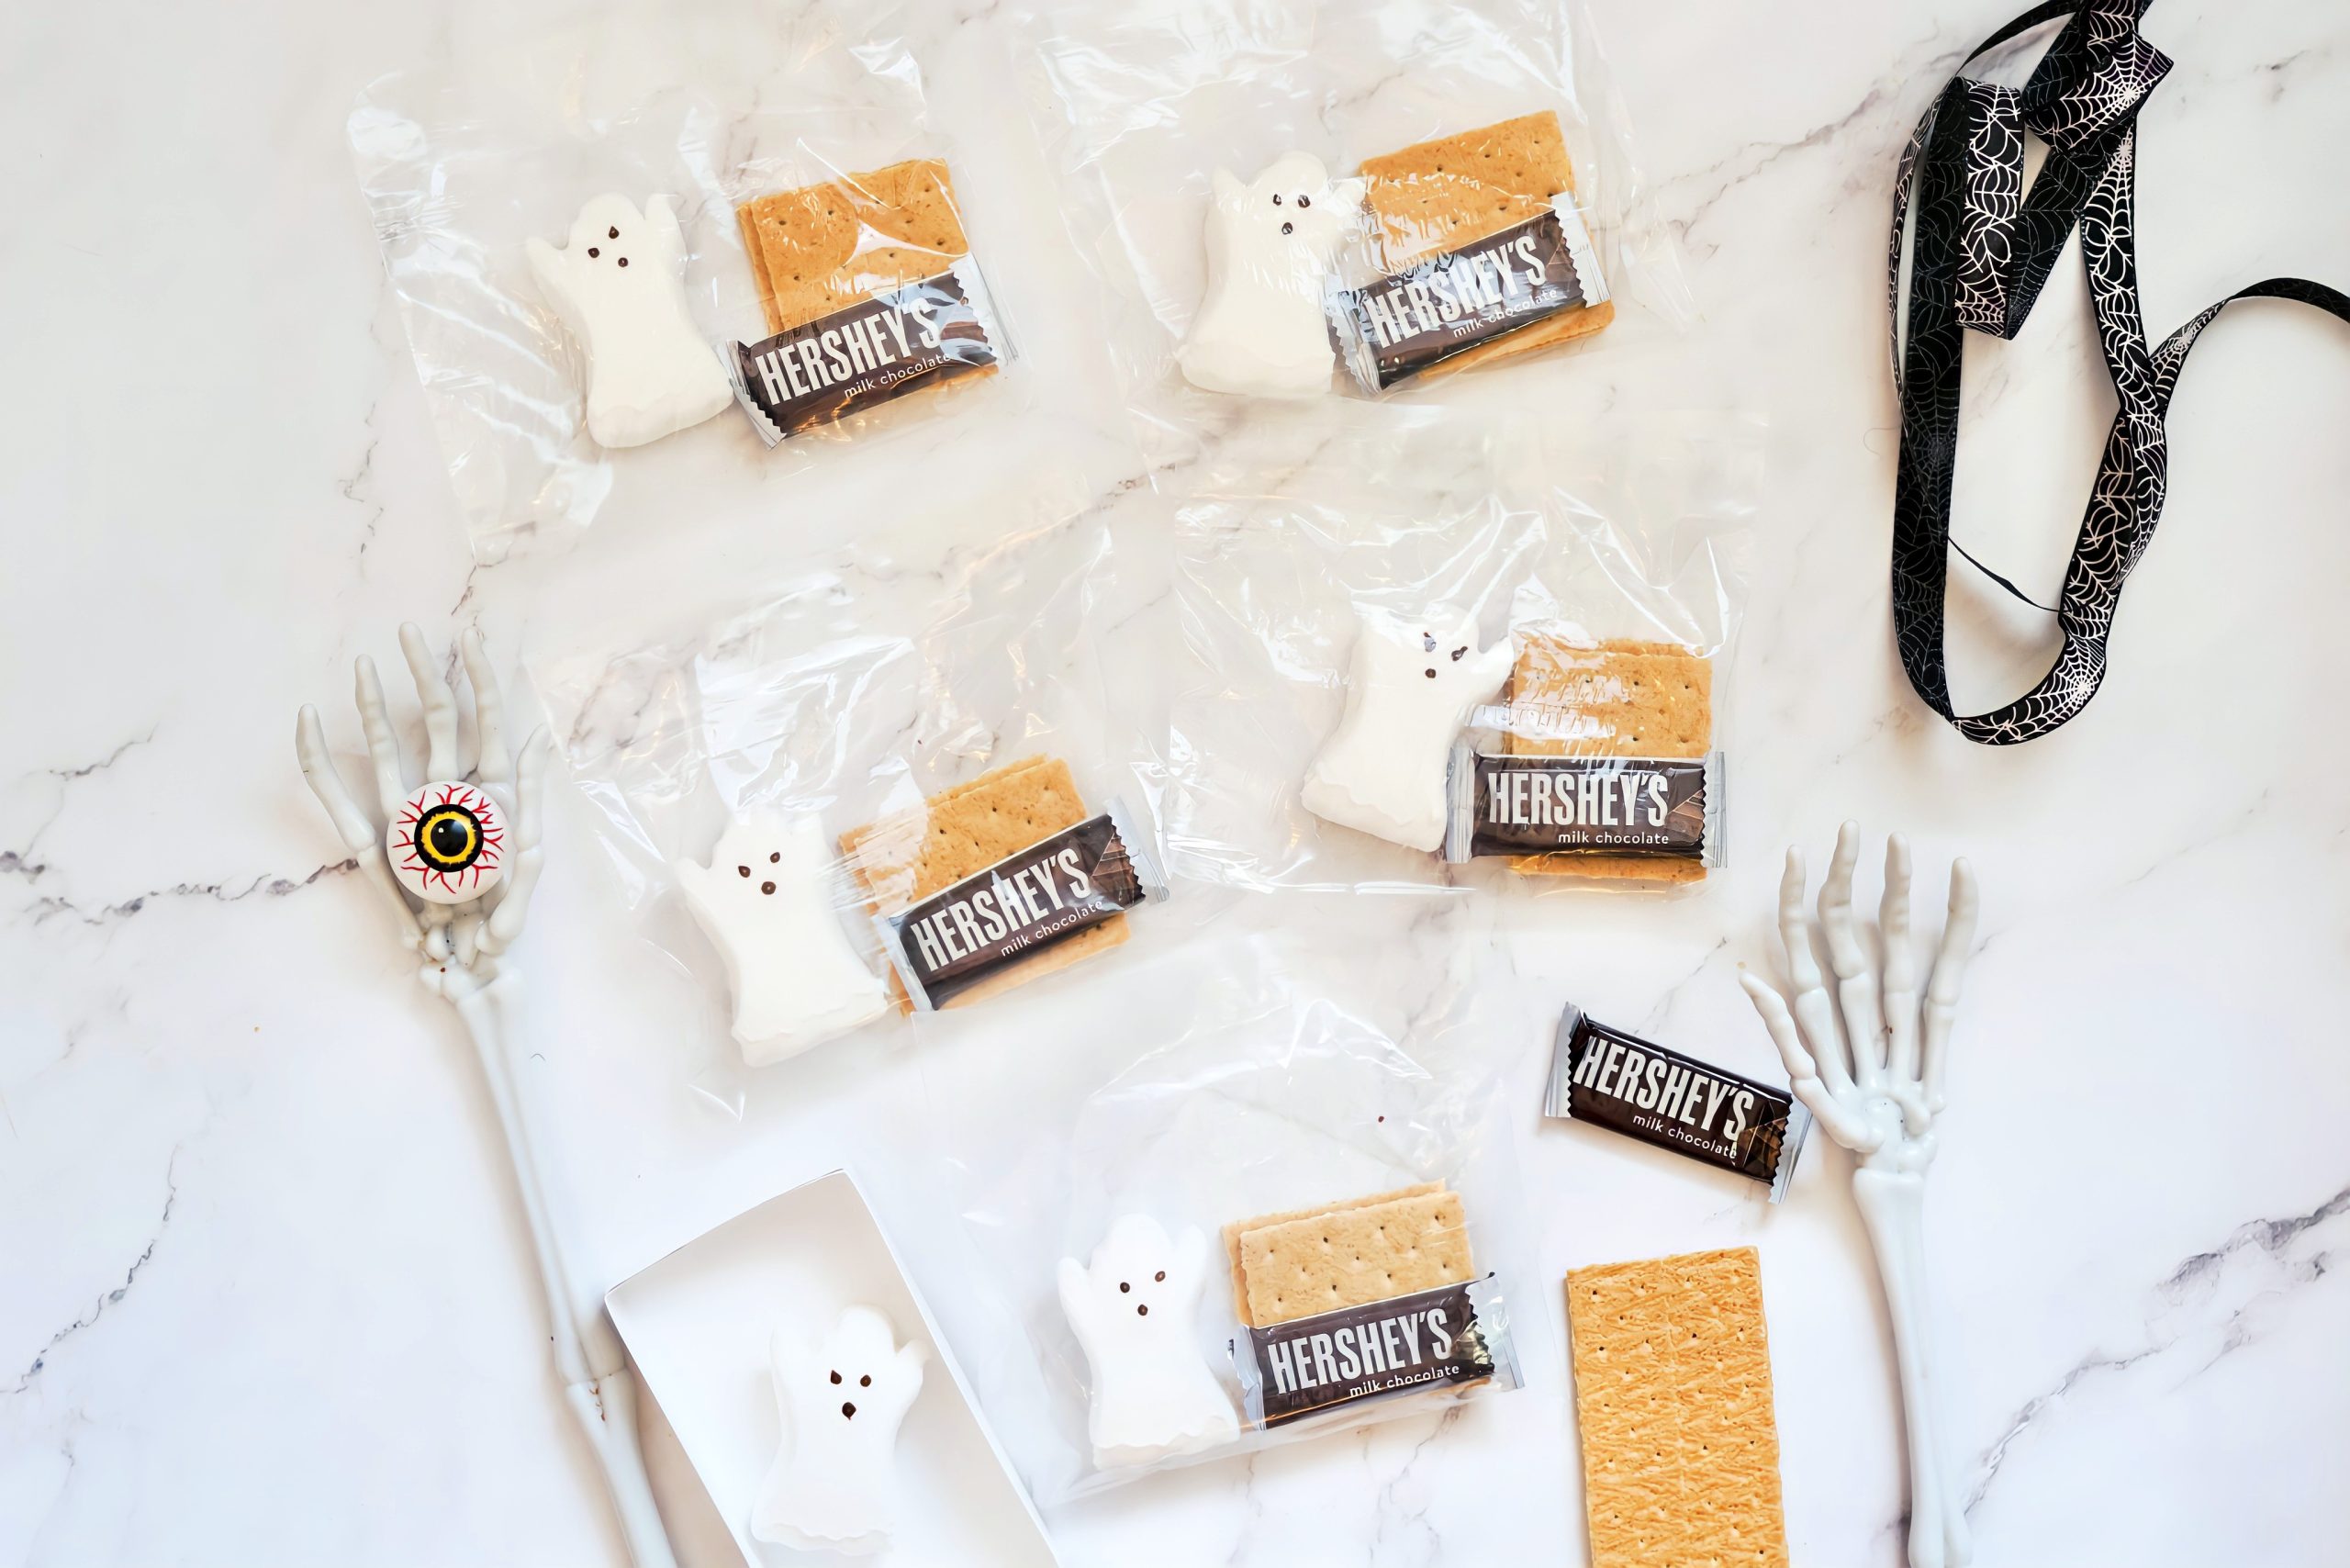 clear plastic bags filled with ghost marshmallow Peeps, graham crackers and Hershey's chocolate